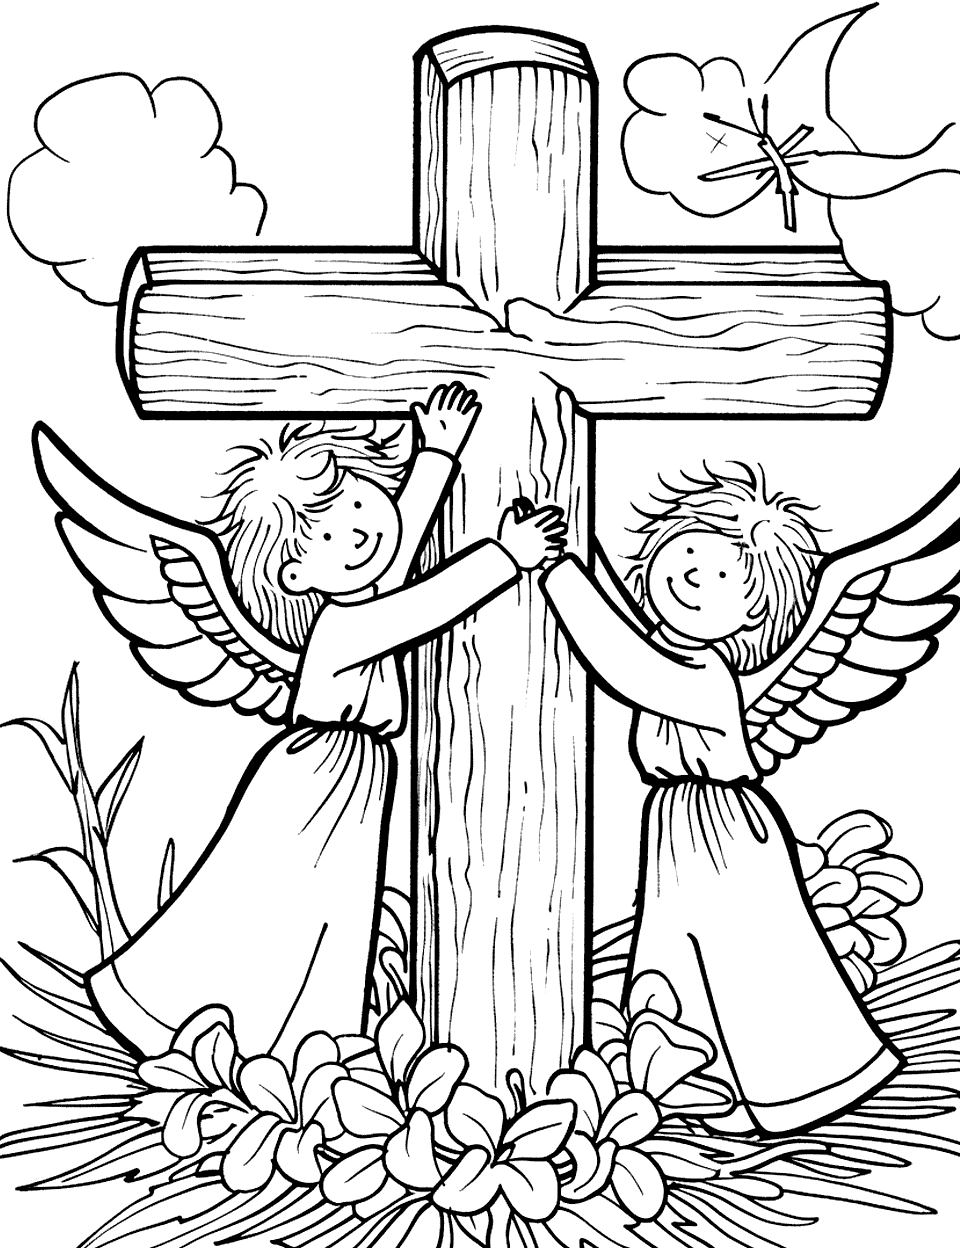 Angels Around a Cross Coloring Page - Two angels with wings touching the cross surrounded by flowers.